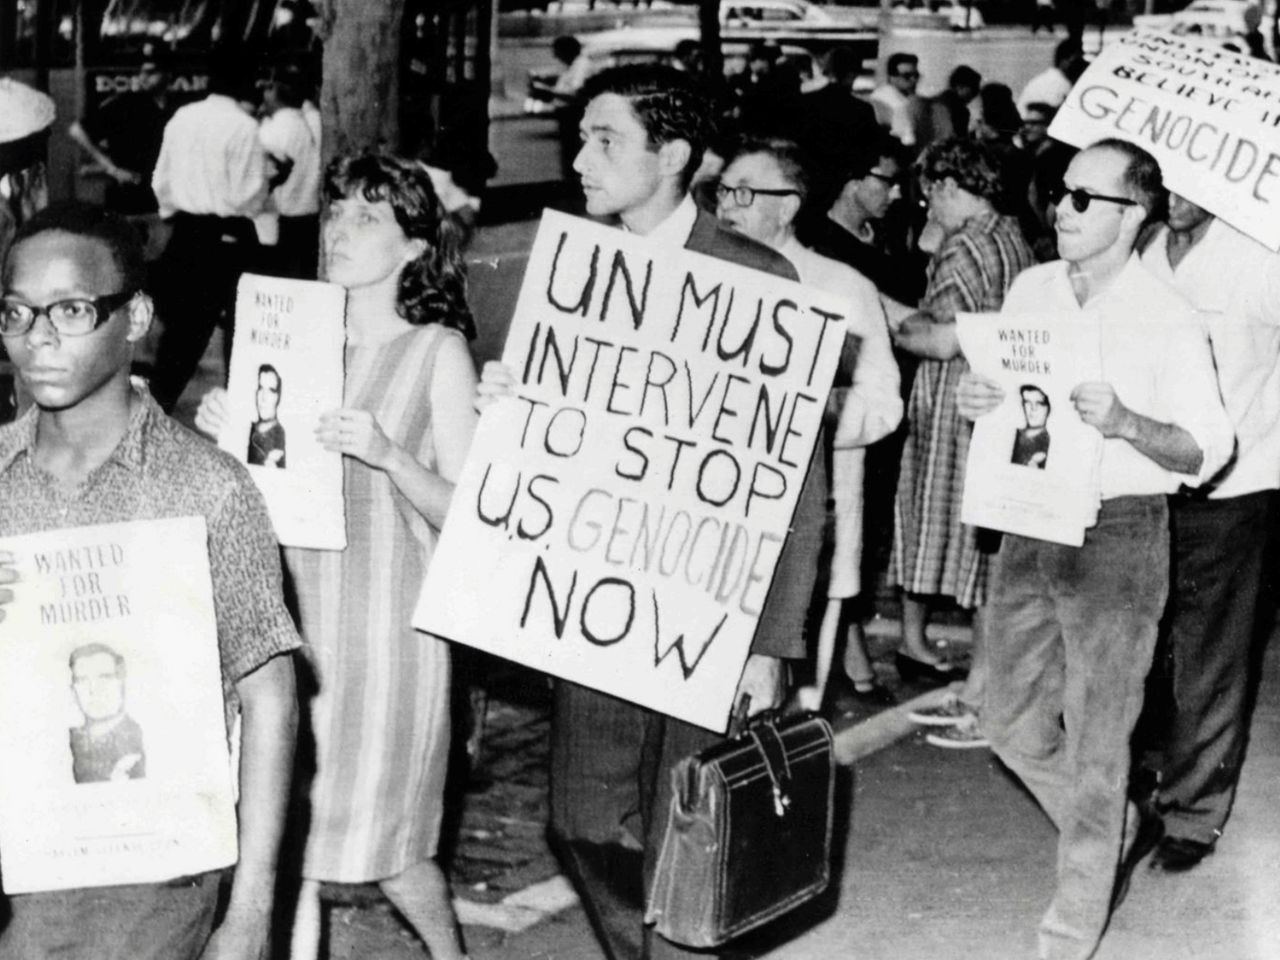 Black and white photograph of protesters holding signs that read, "Wanted for Murder" and "UN Must Intervene to Stop U.S. Genocide Now."